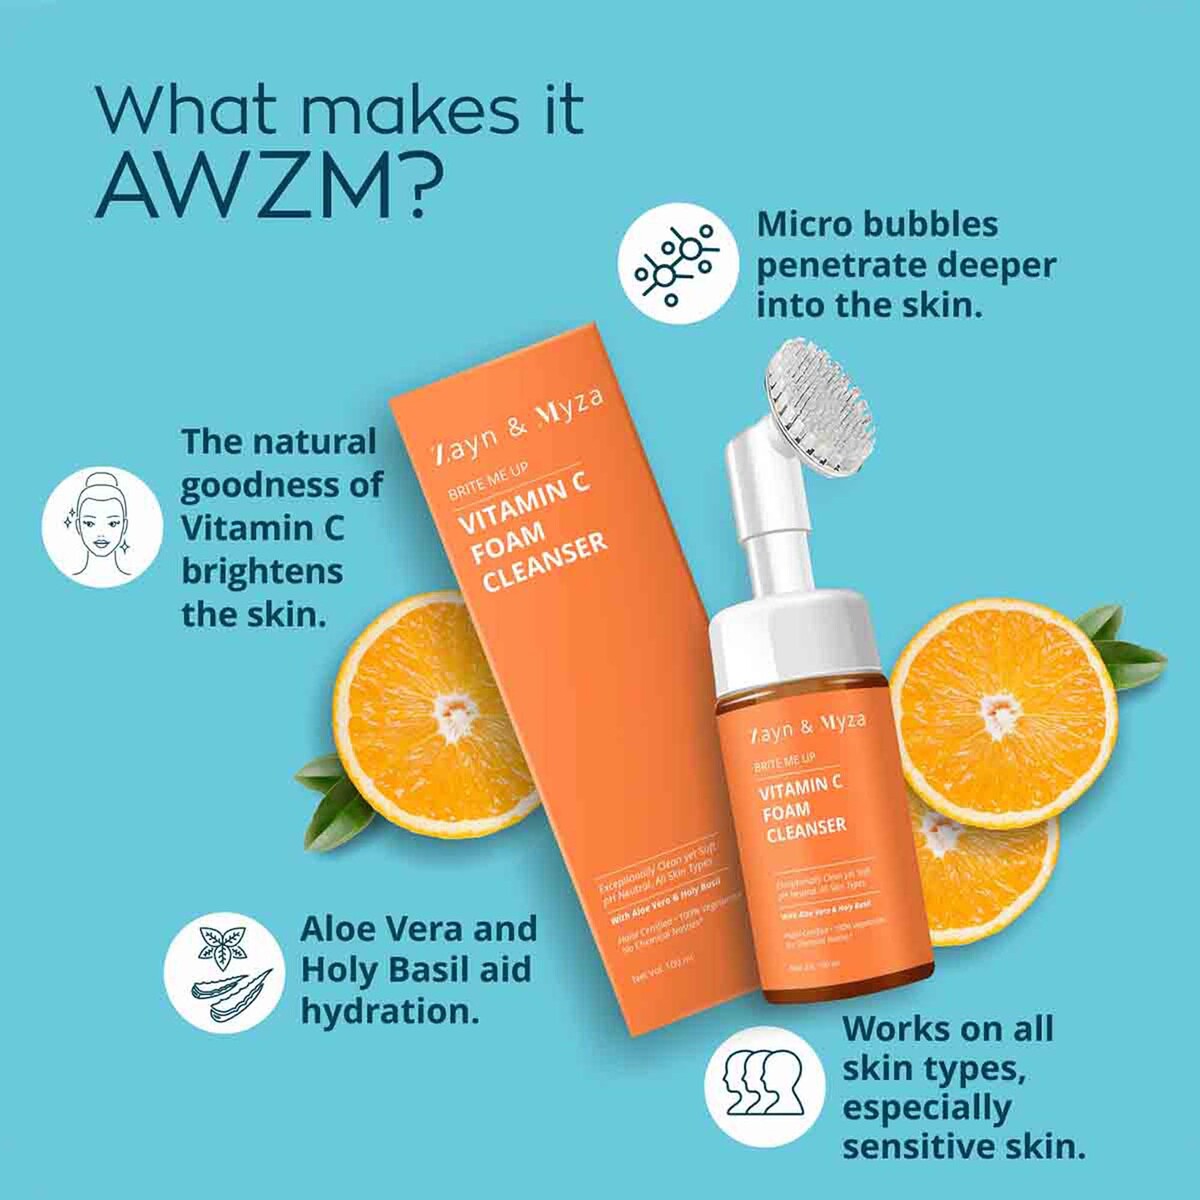 Zayn & Myza Vitamin C Foaming Face Wash with Silicone Cleanser Brush for Glowing Skin, Hyper pigmented & Dull Skin, 100 ml